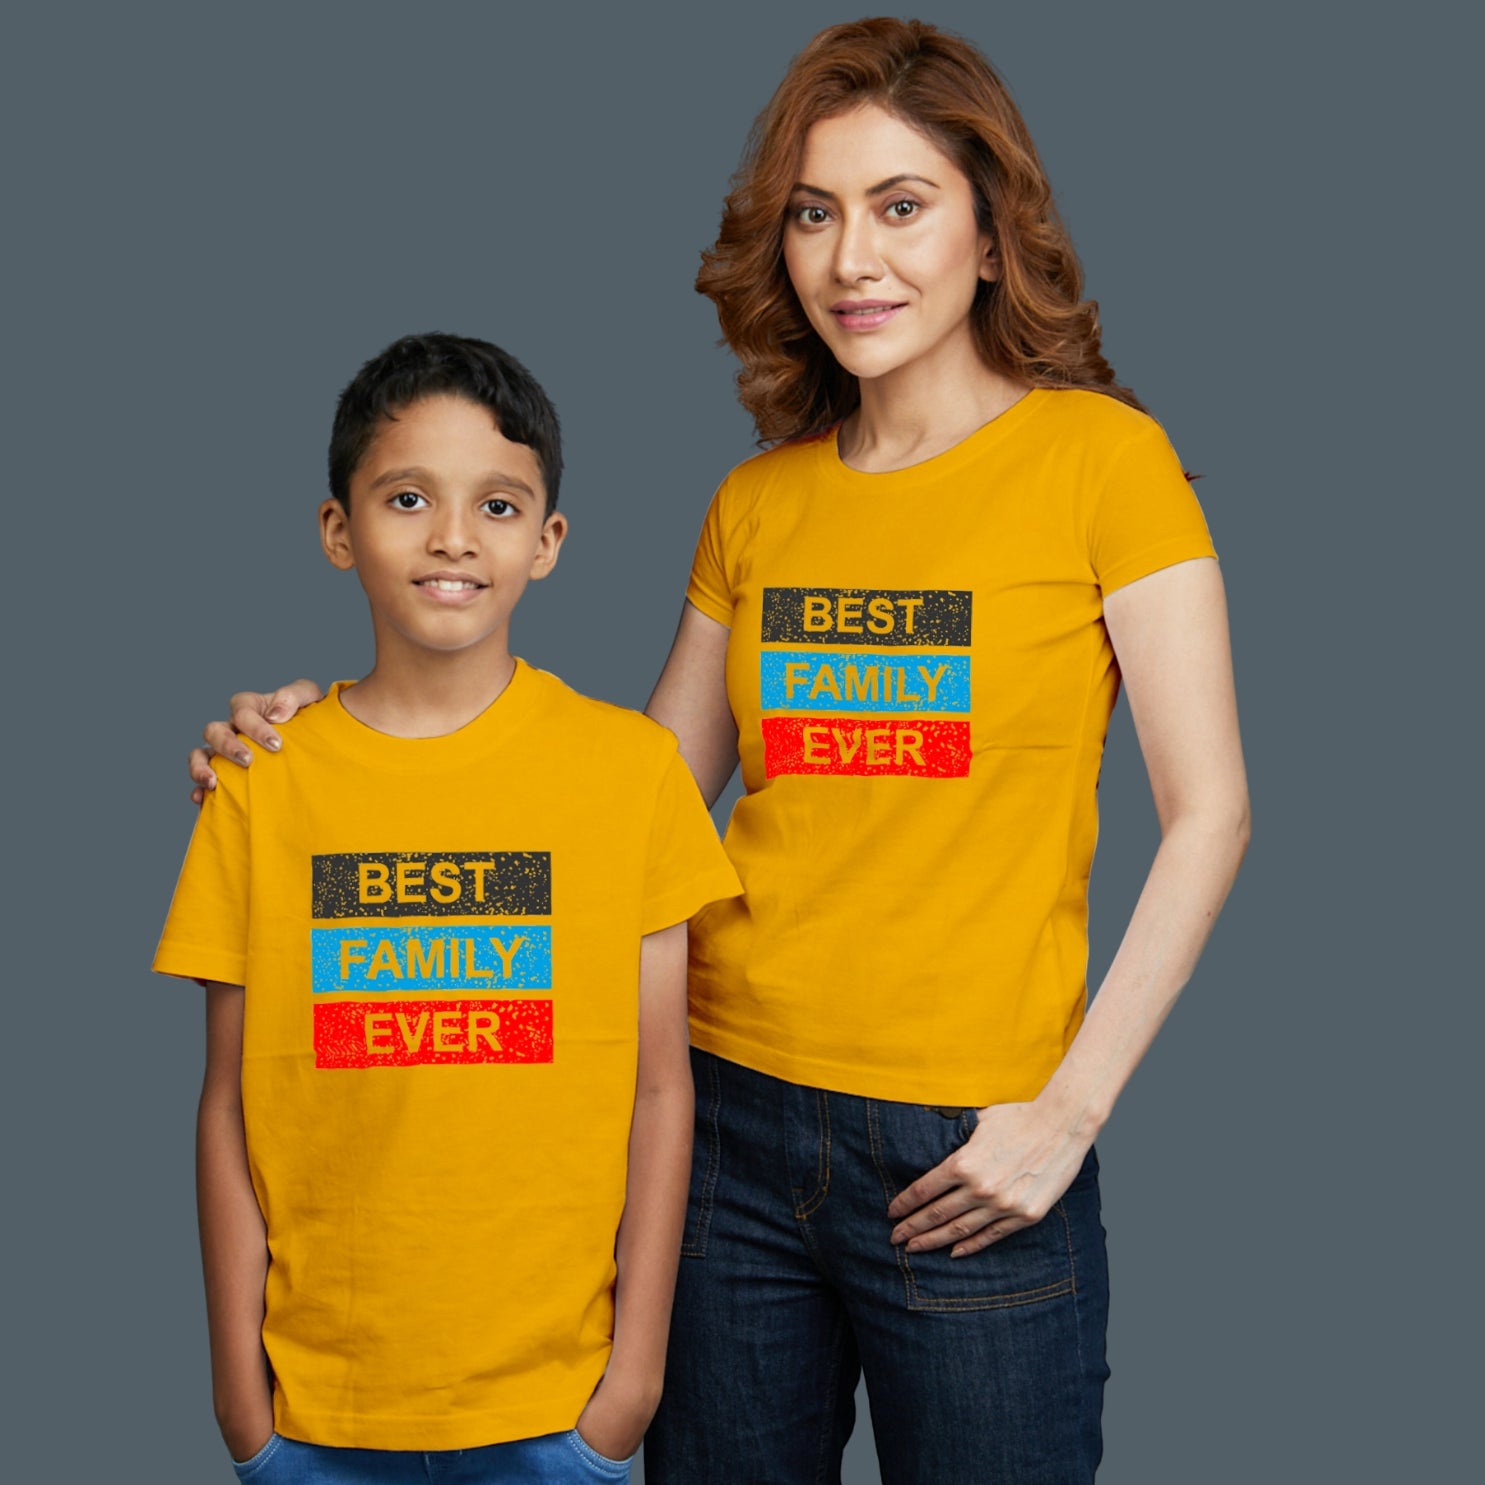 Family of 2 t shirt for Mom Son in Yellow Colour- Best Family Ever Variant